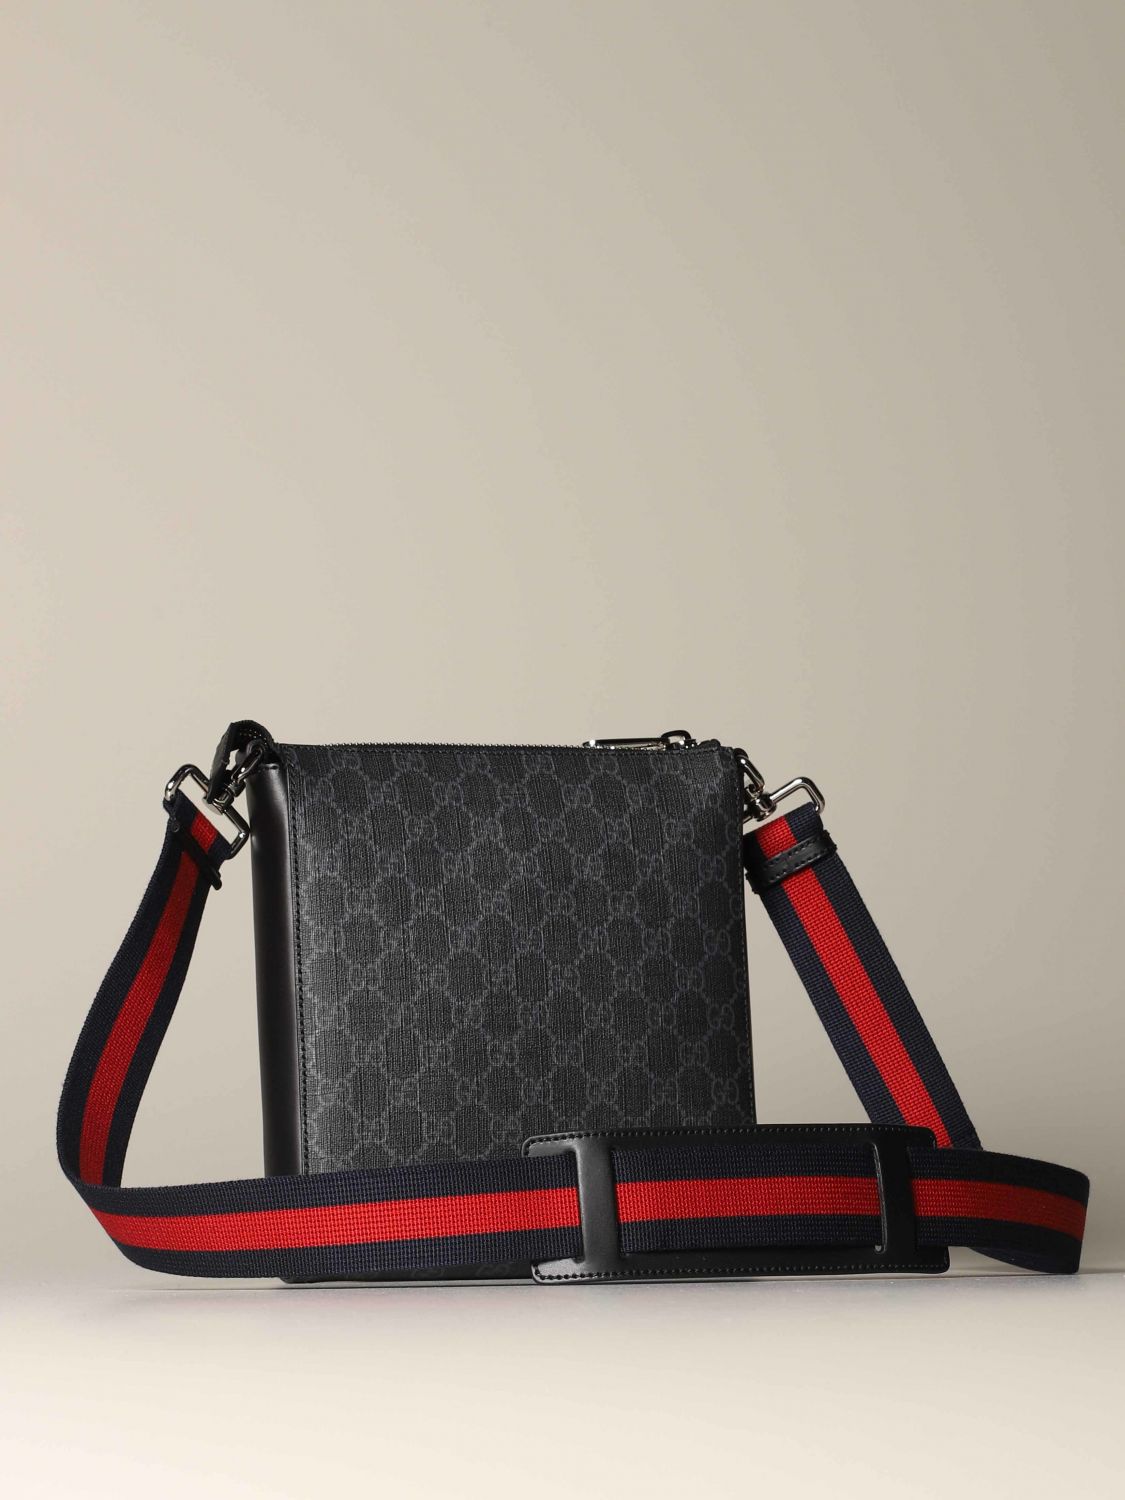 gucci bag with web strap